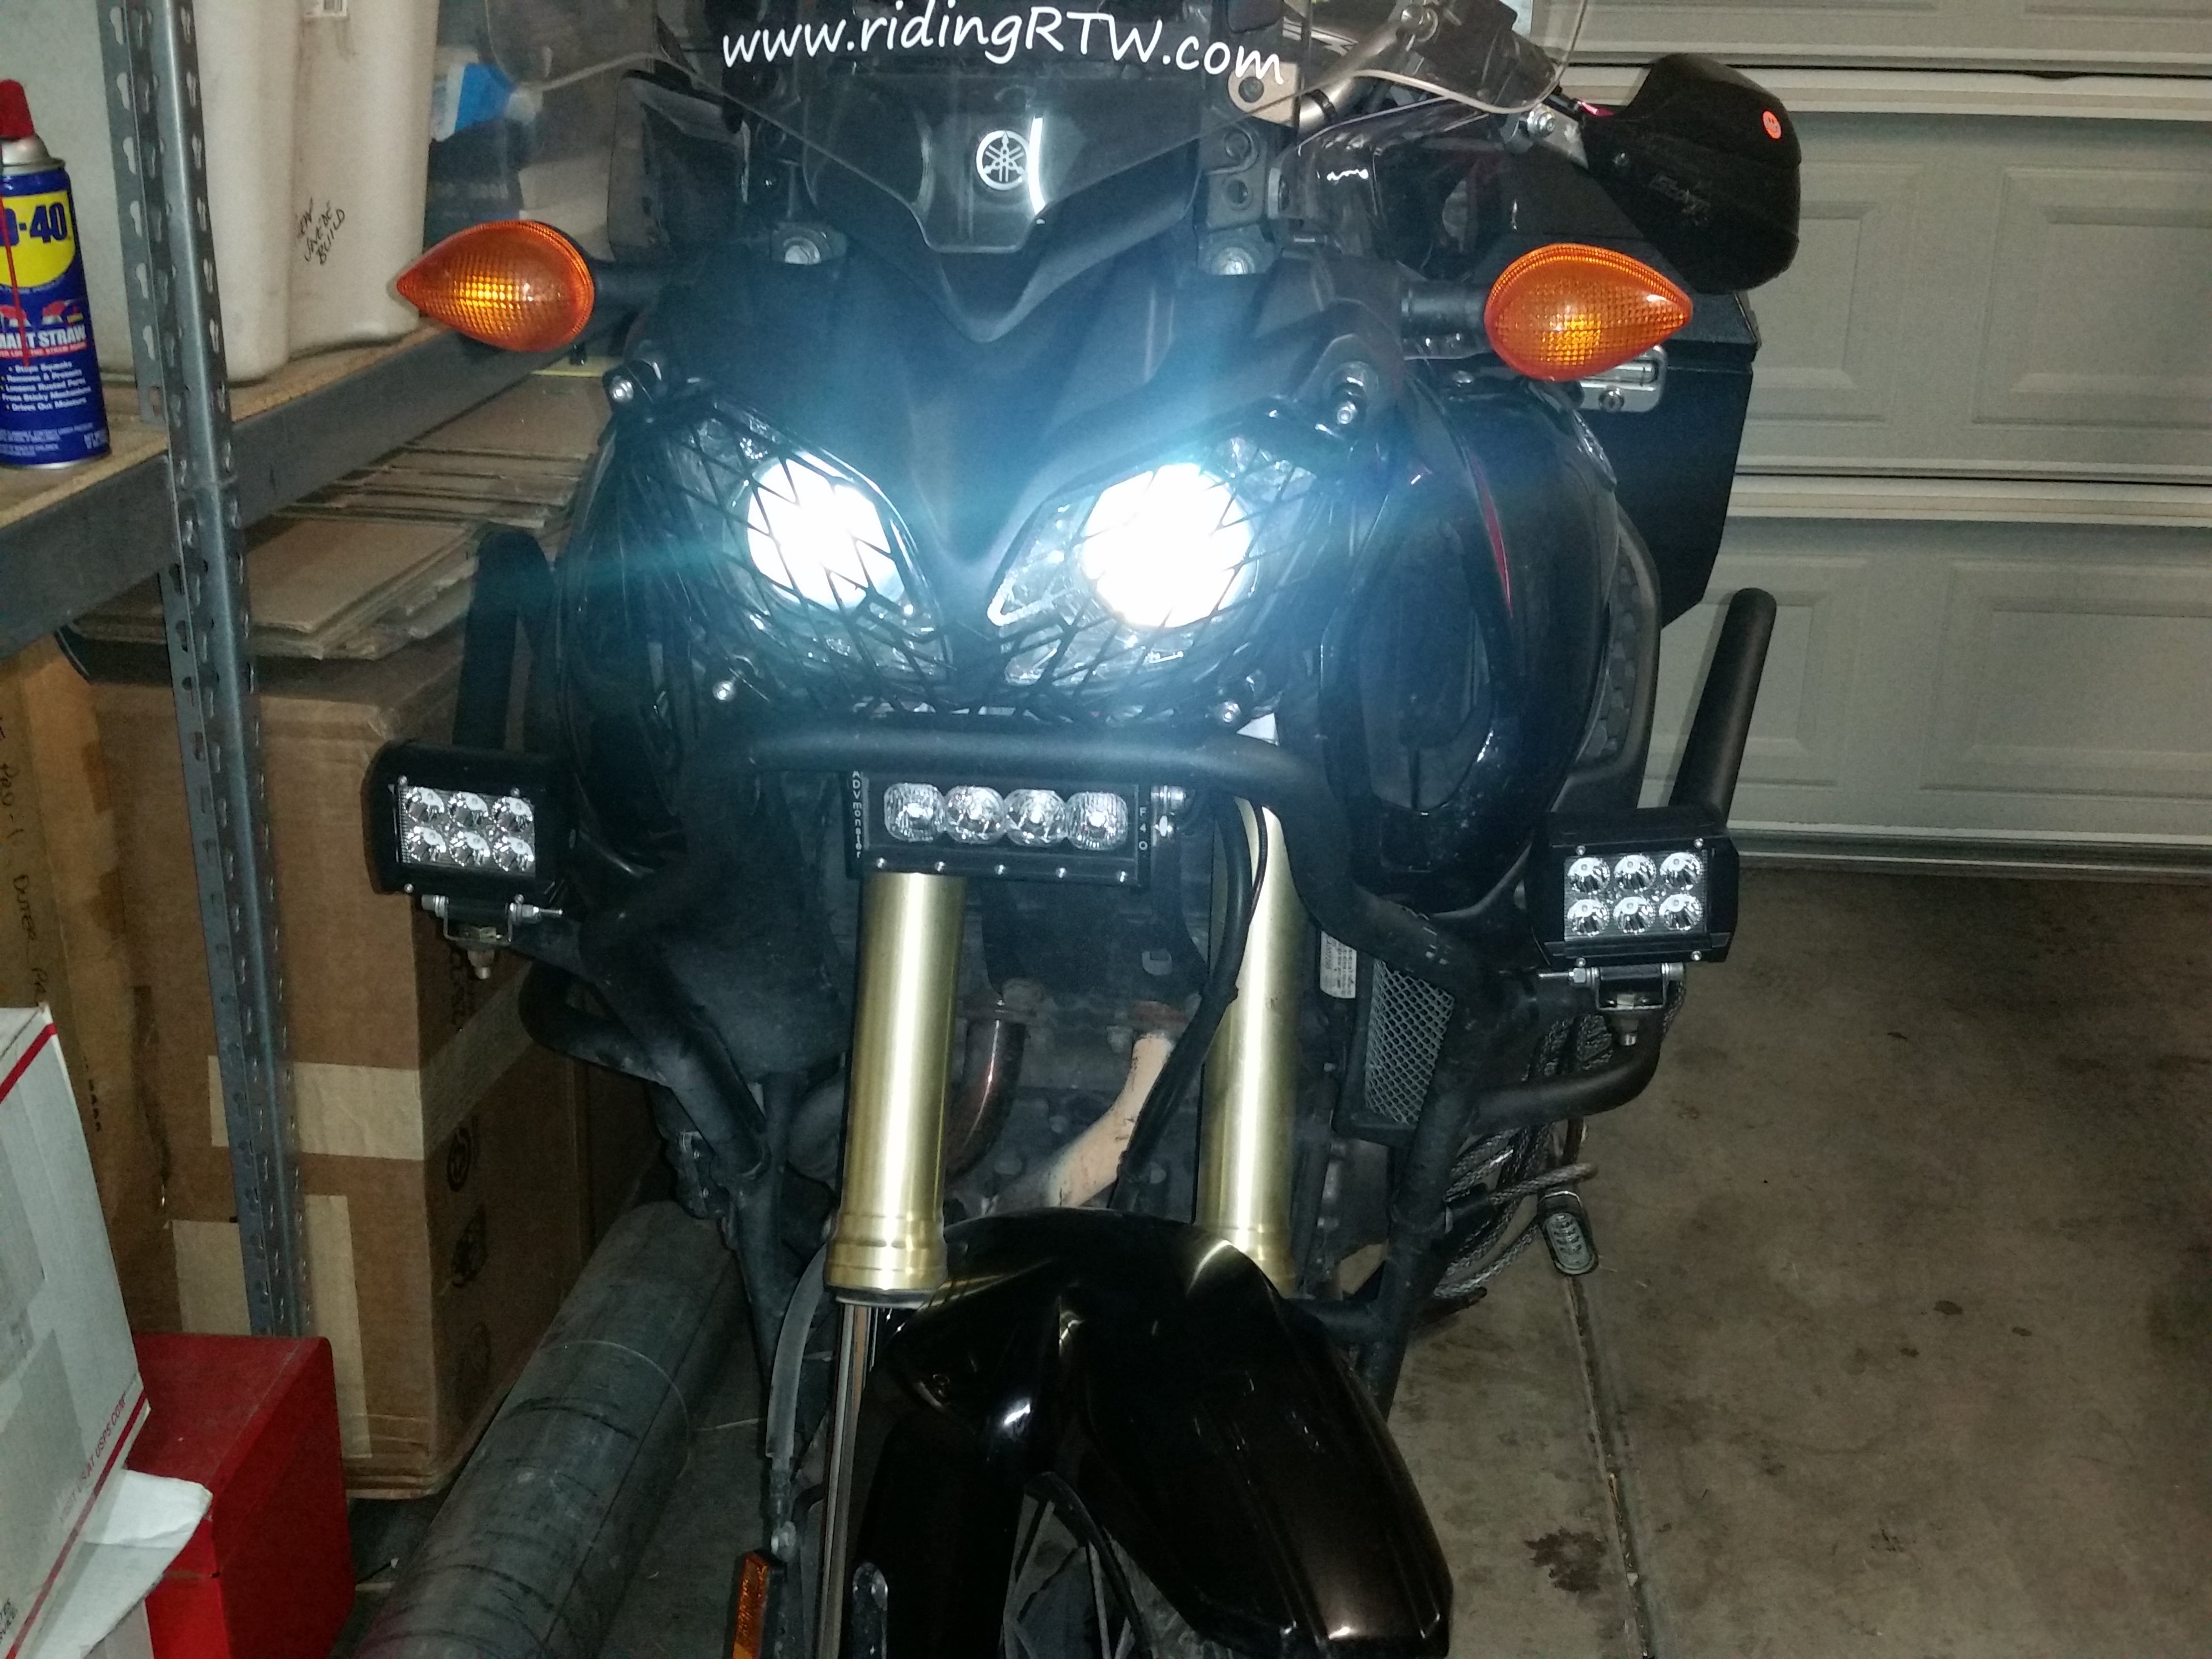 Wiring Up LED Lights, Its Easy - Adventure Rider